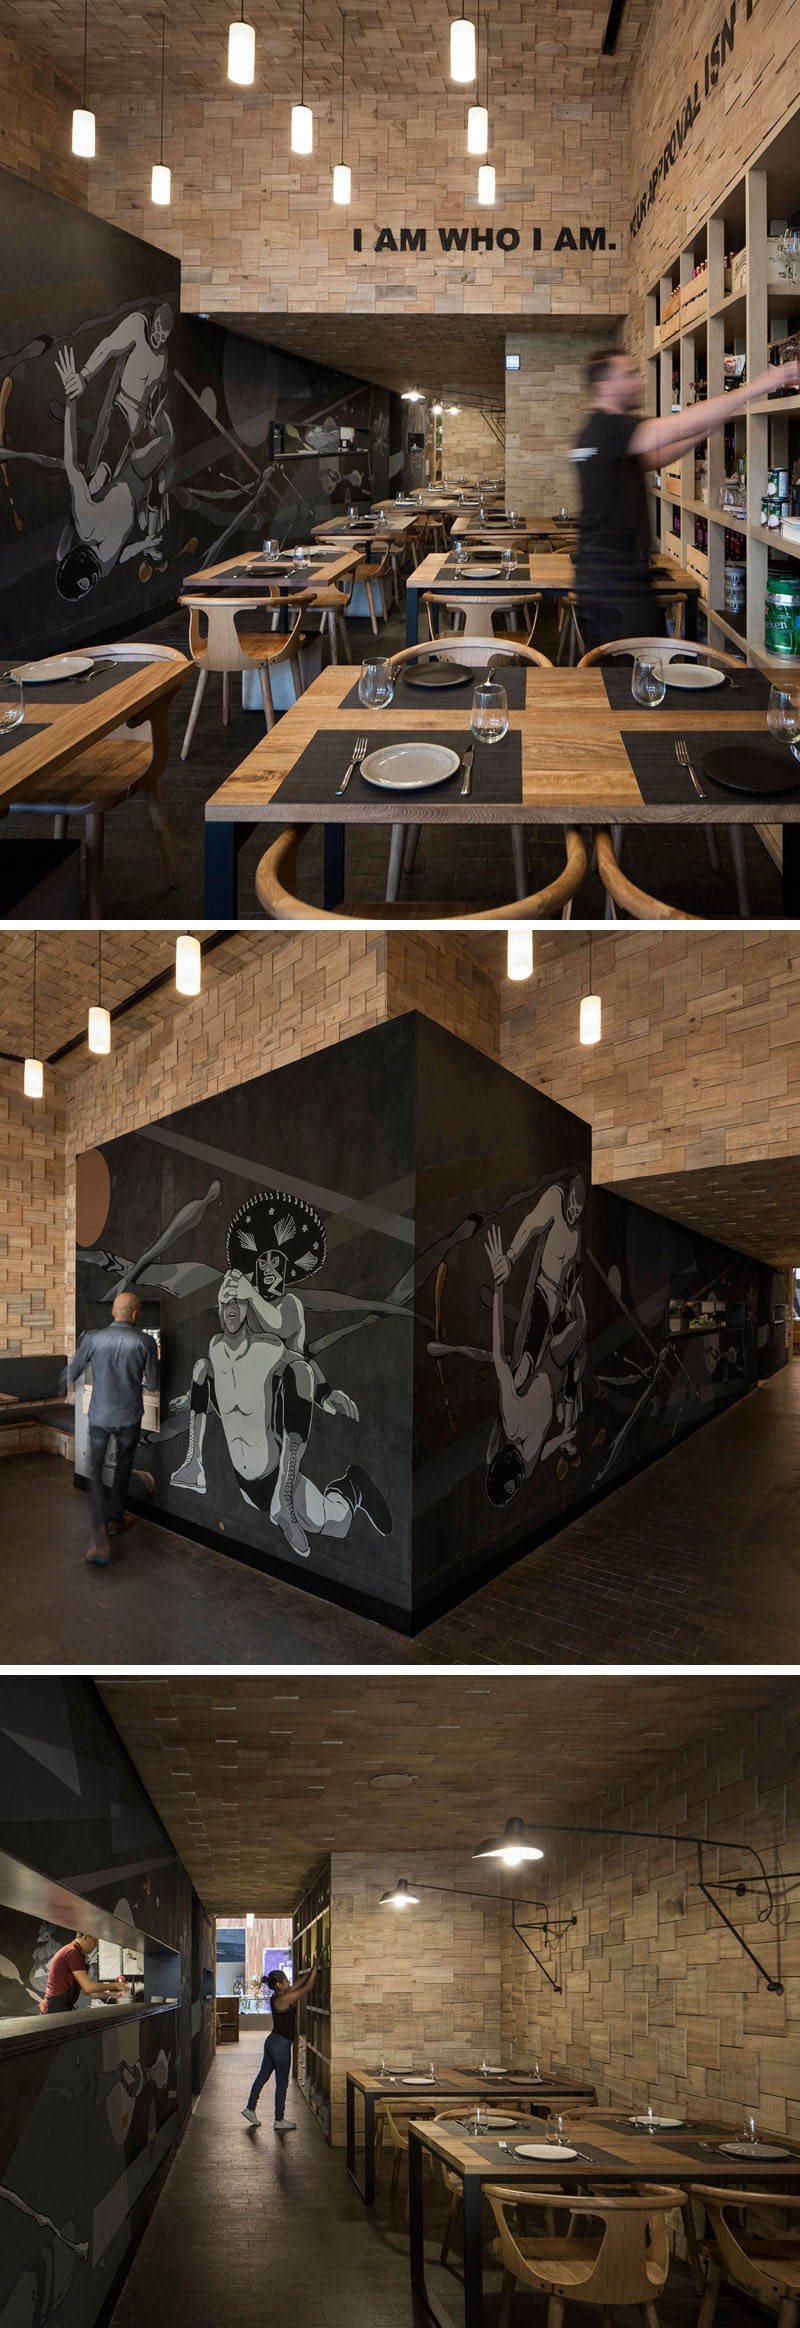 Wood shingles and a large graffiti mural by street artist Seher One covers the walls of this restaurant that hide the semi-open kitchen.